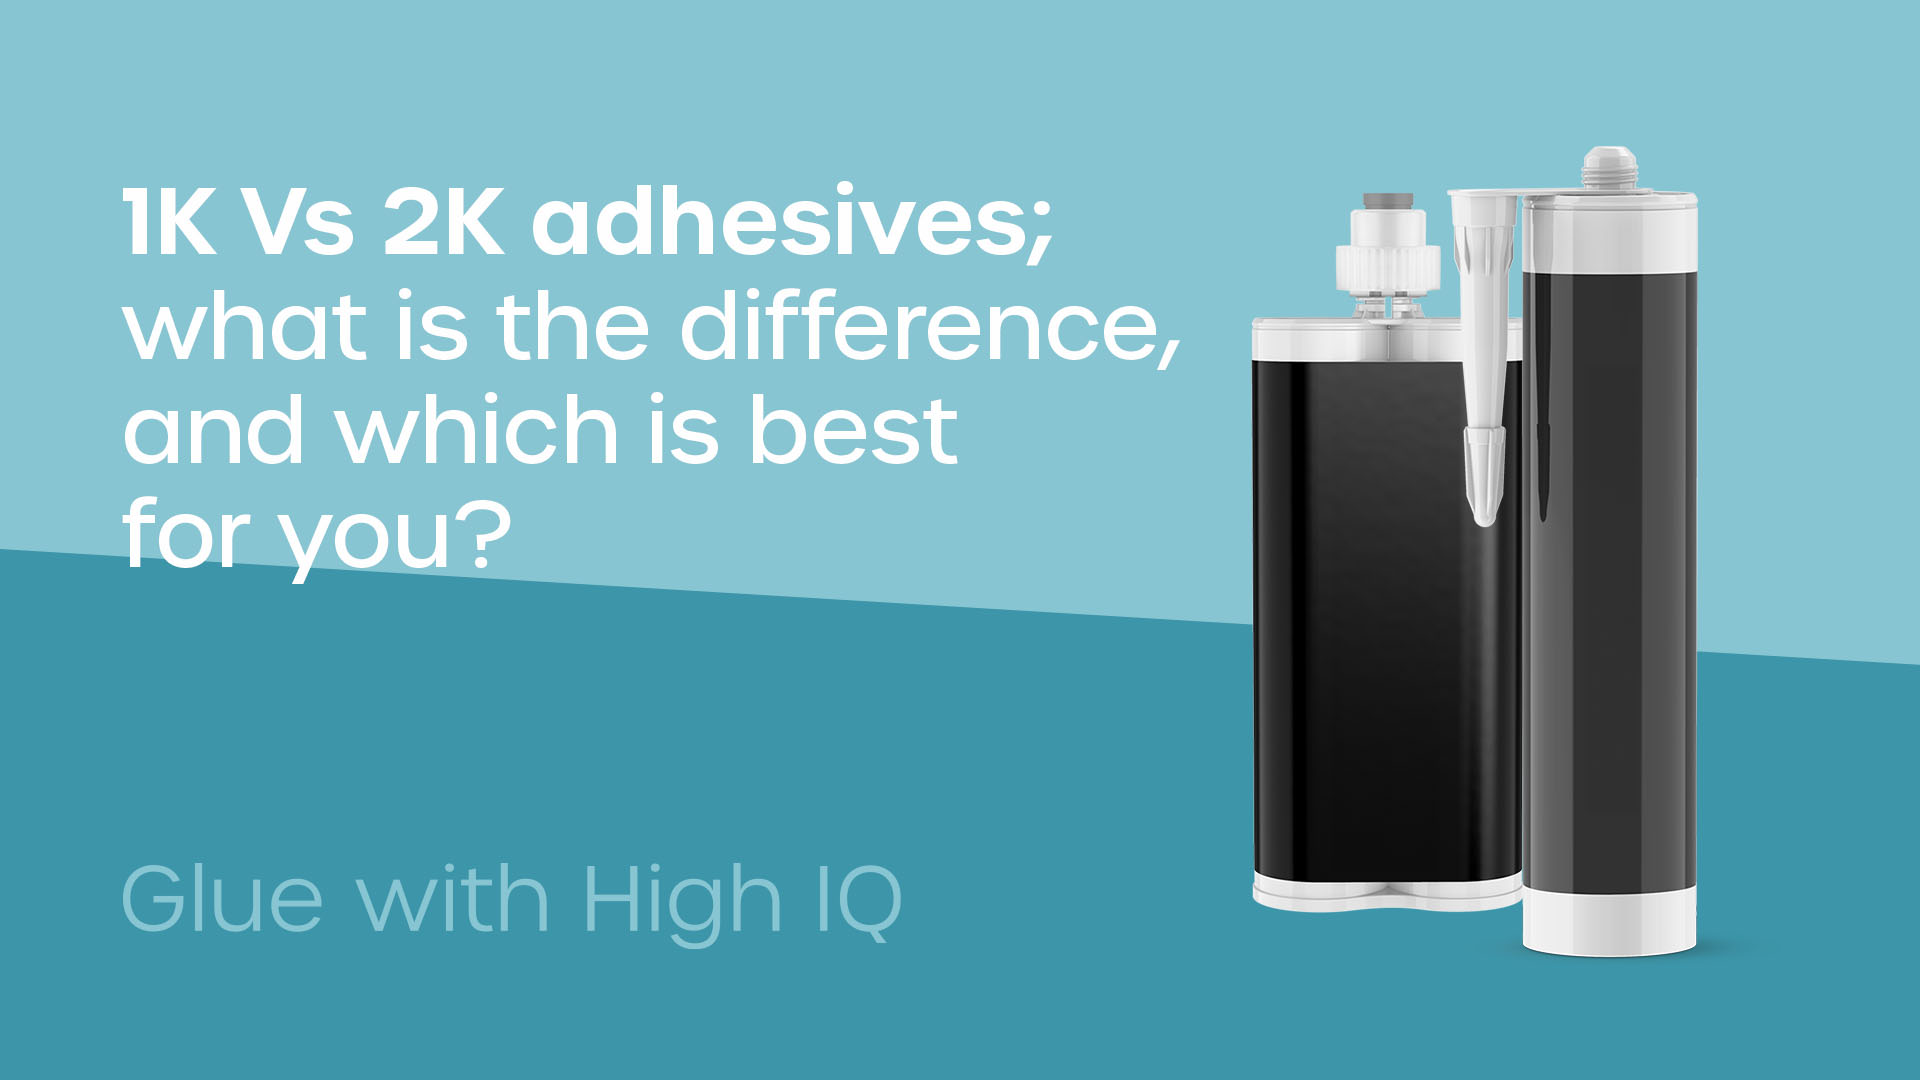 1K Vs 2K adhesives; what is the difference, and which is best for you?